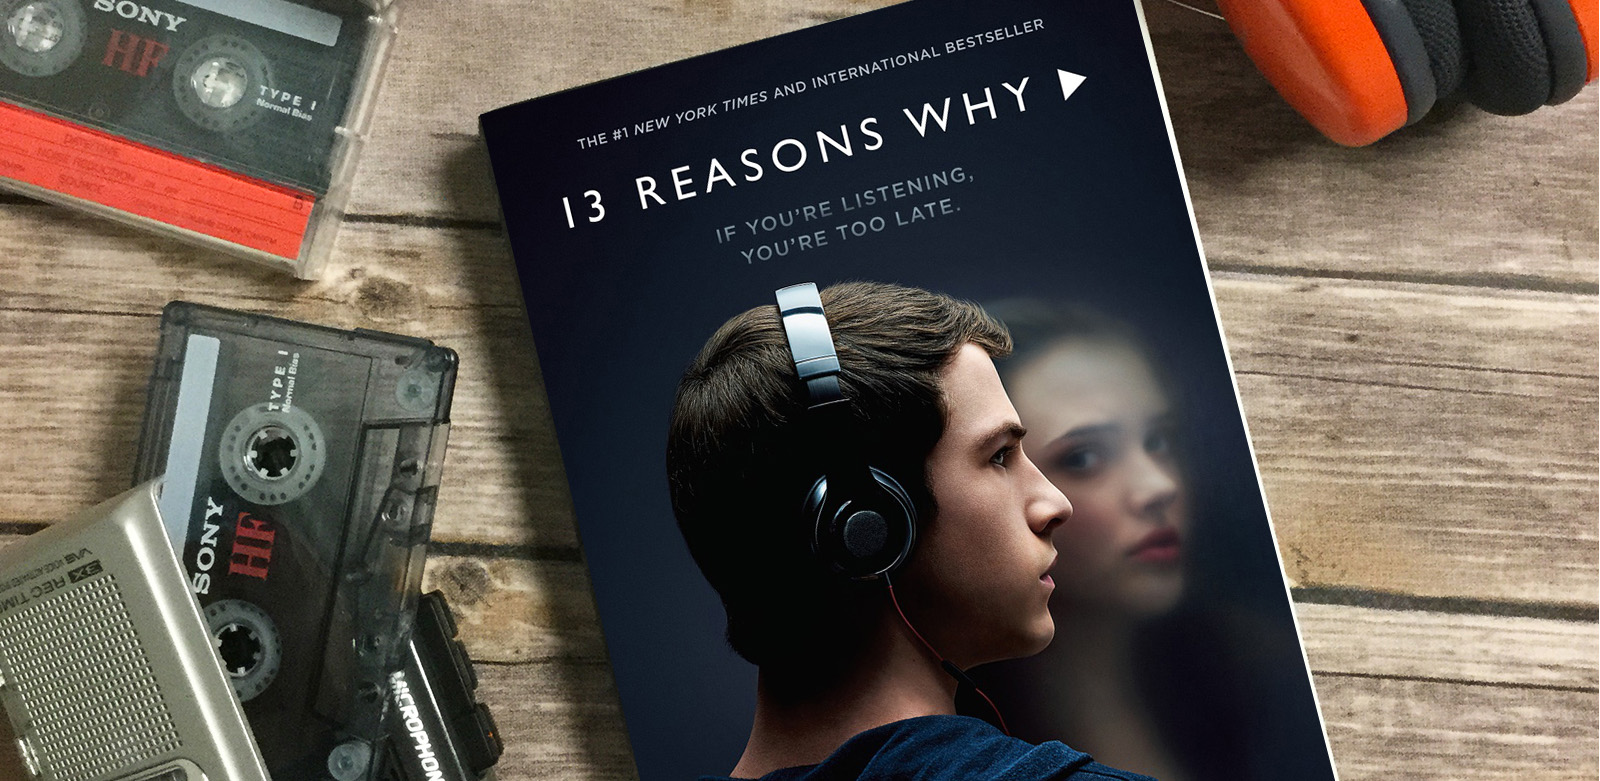 is there a 13 reasons why season 2